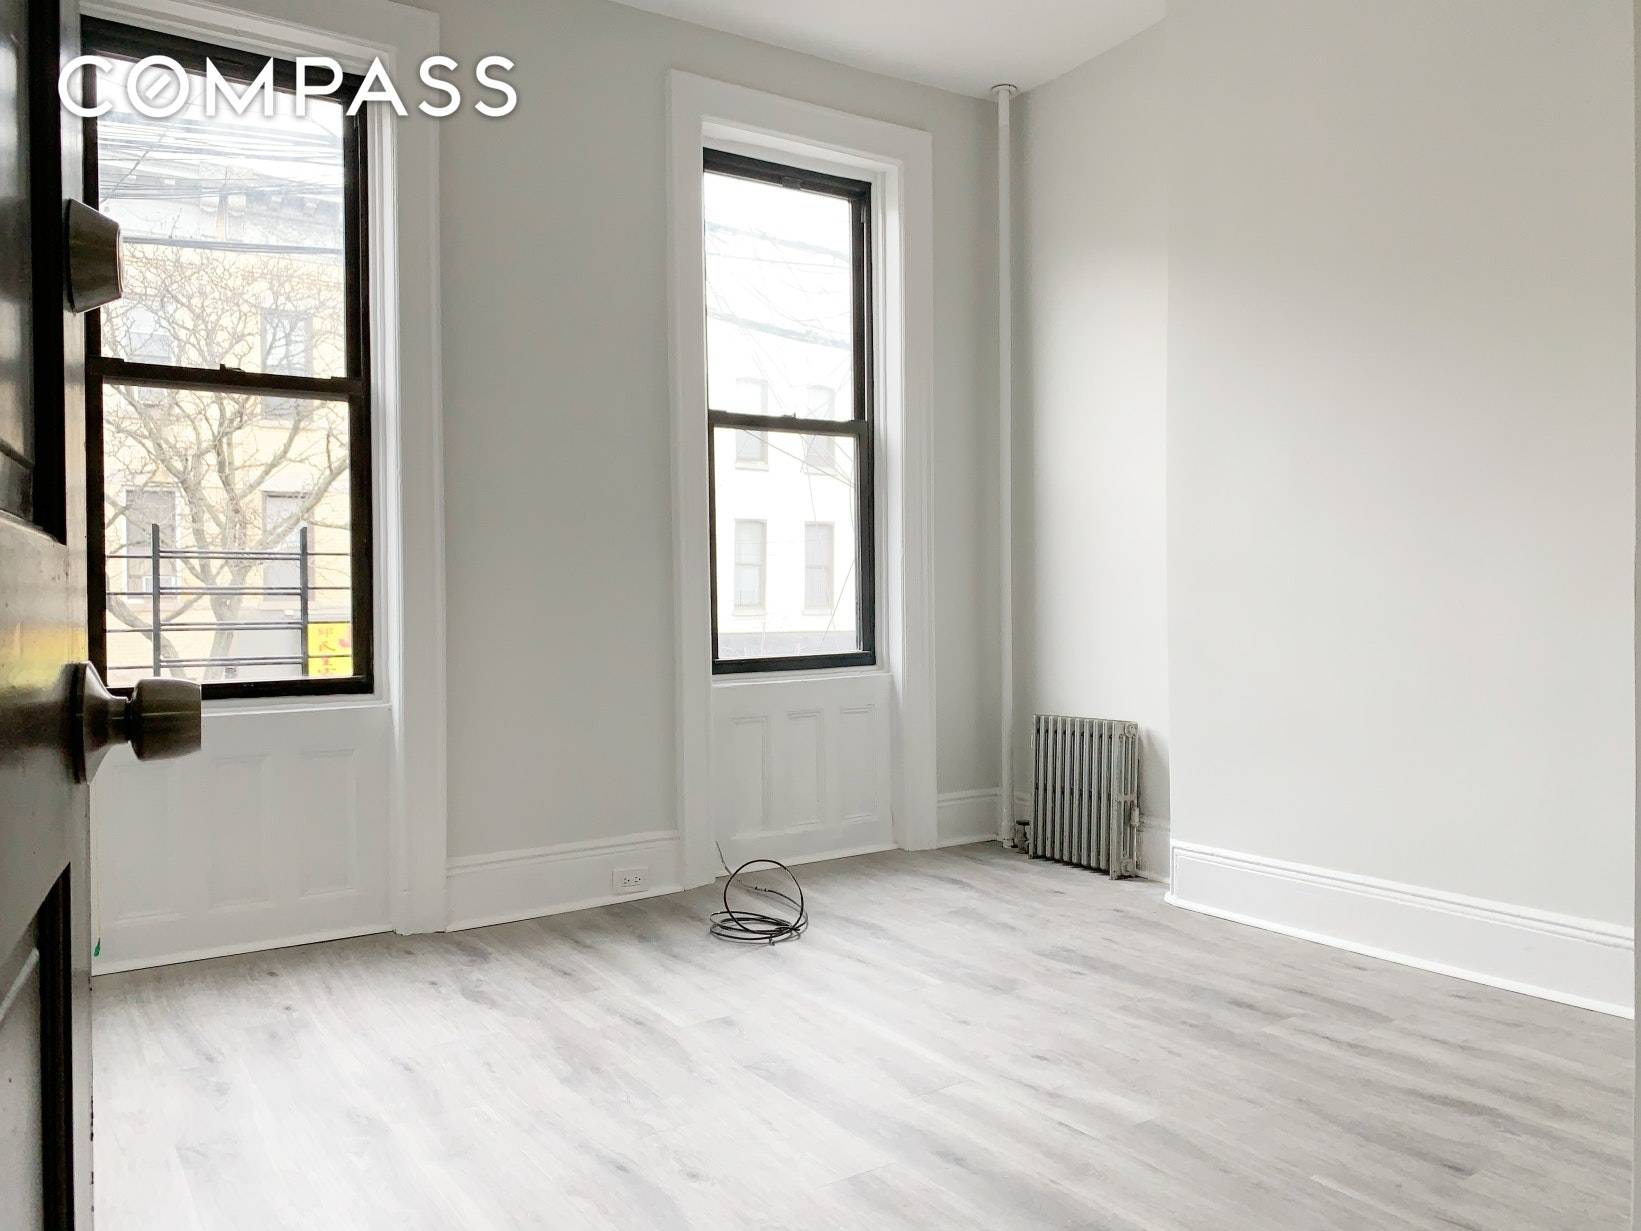 562 Seneca Ave is a redesigned NO FEE apartment optimized to allow the most convenient living situation for any tenant.